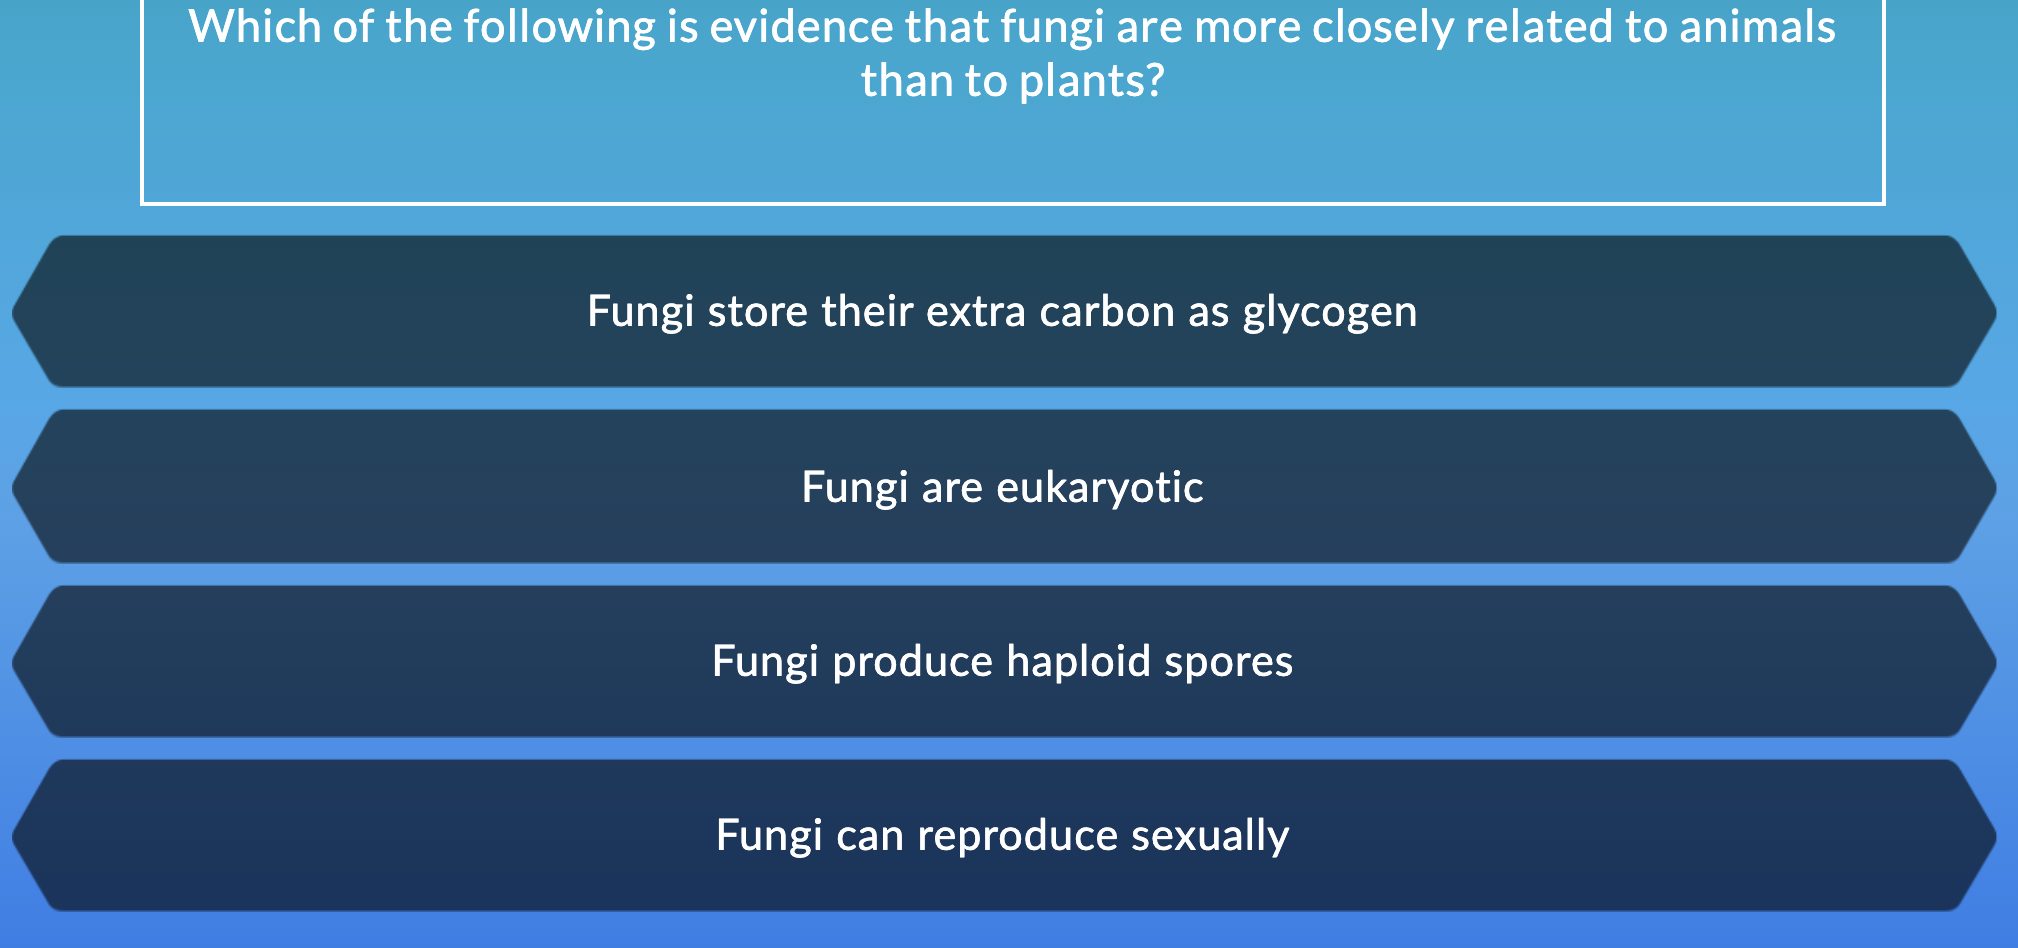 Which of the following is evidence that fungi are more closely related to animals
than to plants?
Fungi store their extra carbon as glycogen
Fungi are eukaryotic
Fungi produce haploid spores
Fungi can reproduce sexually
